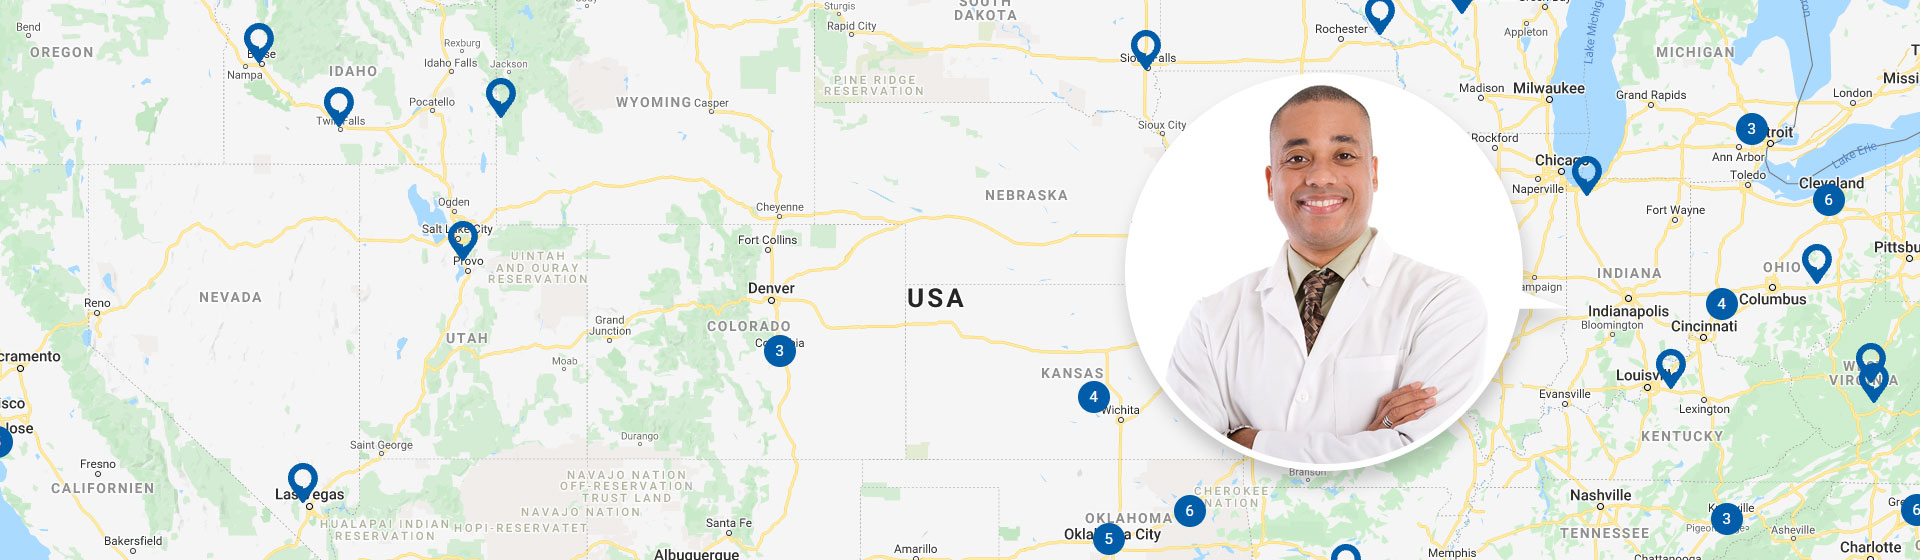 Image shows map shows hearing clinics with audiologist near you